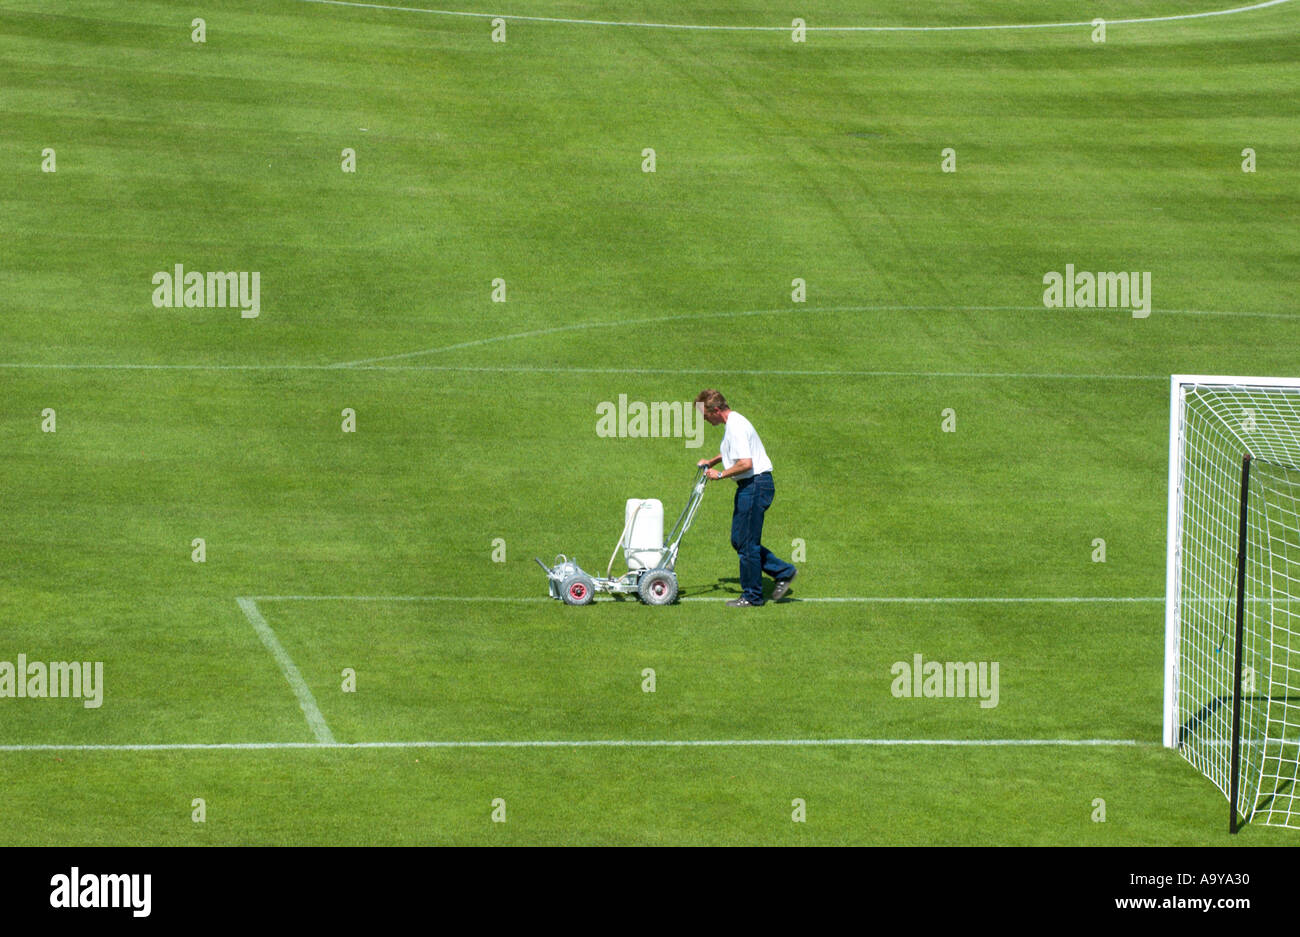 groundkeeper chalks the lines of the penalty box of a football pitch Stock Photo